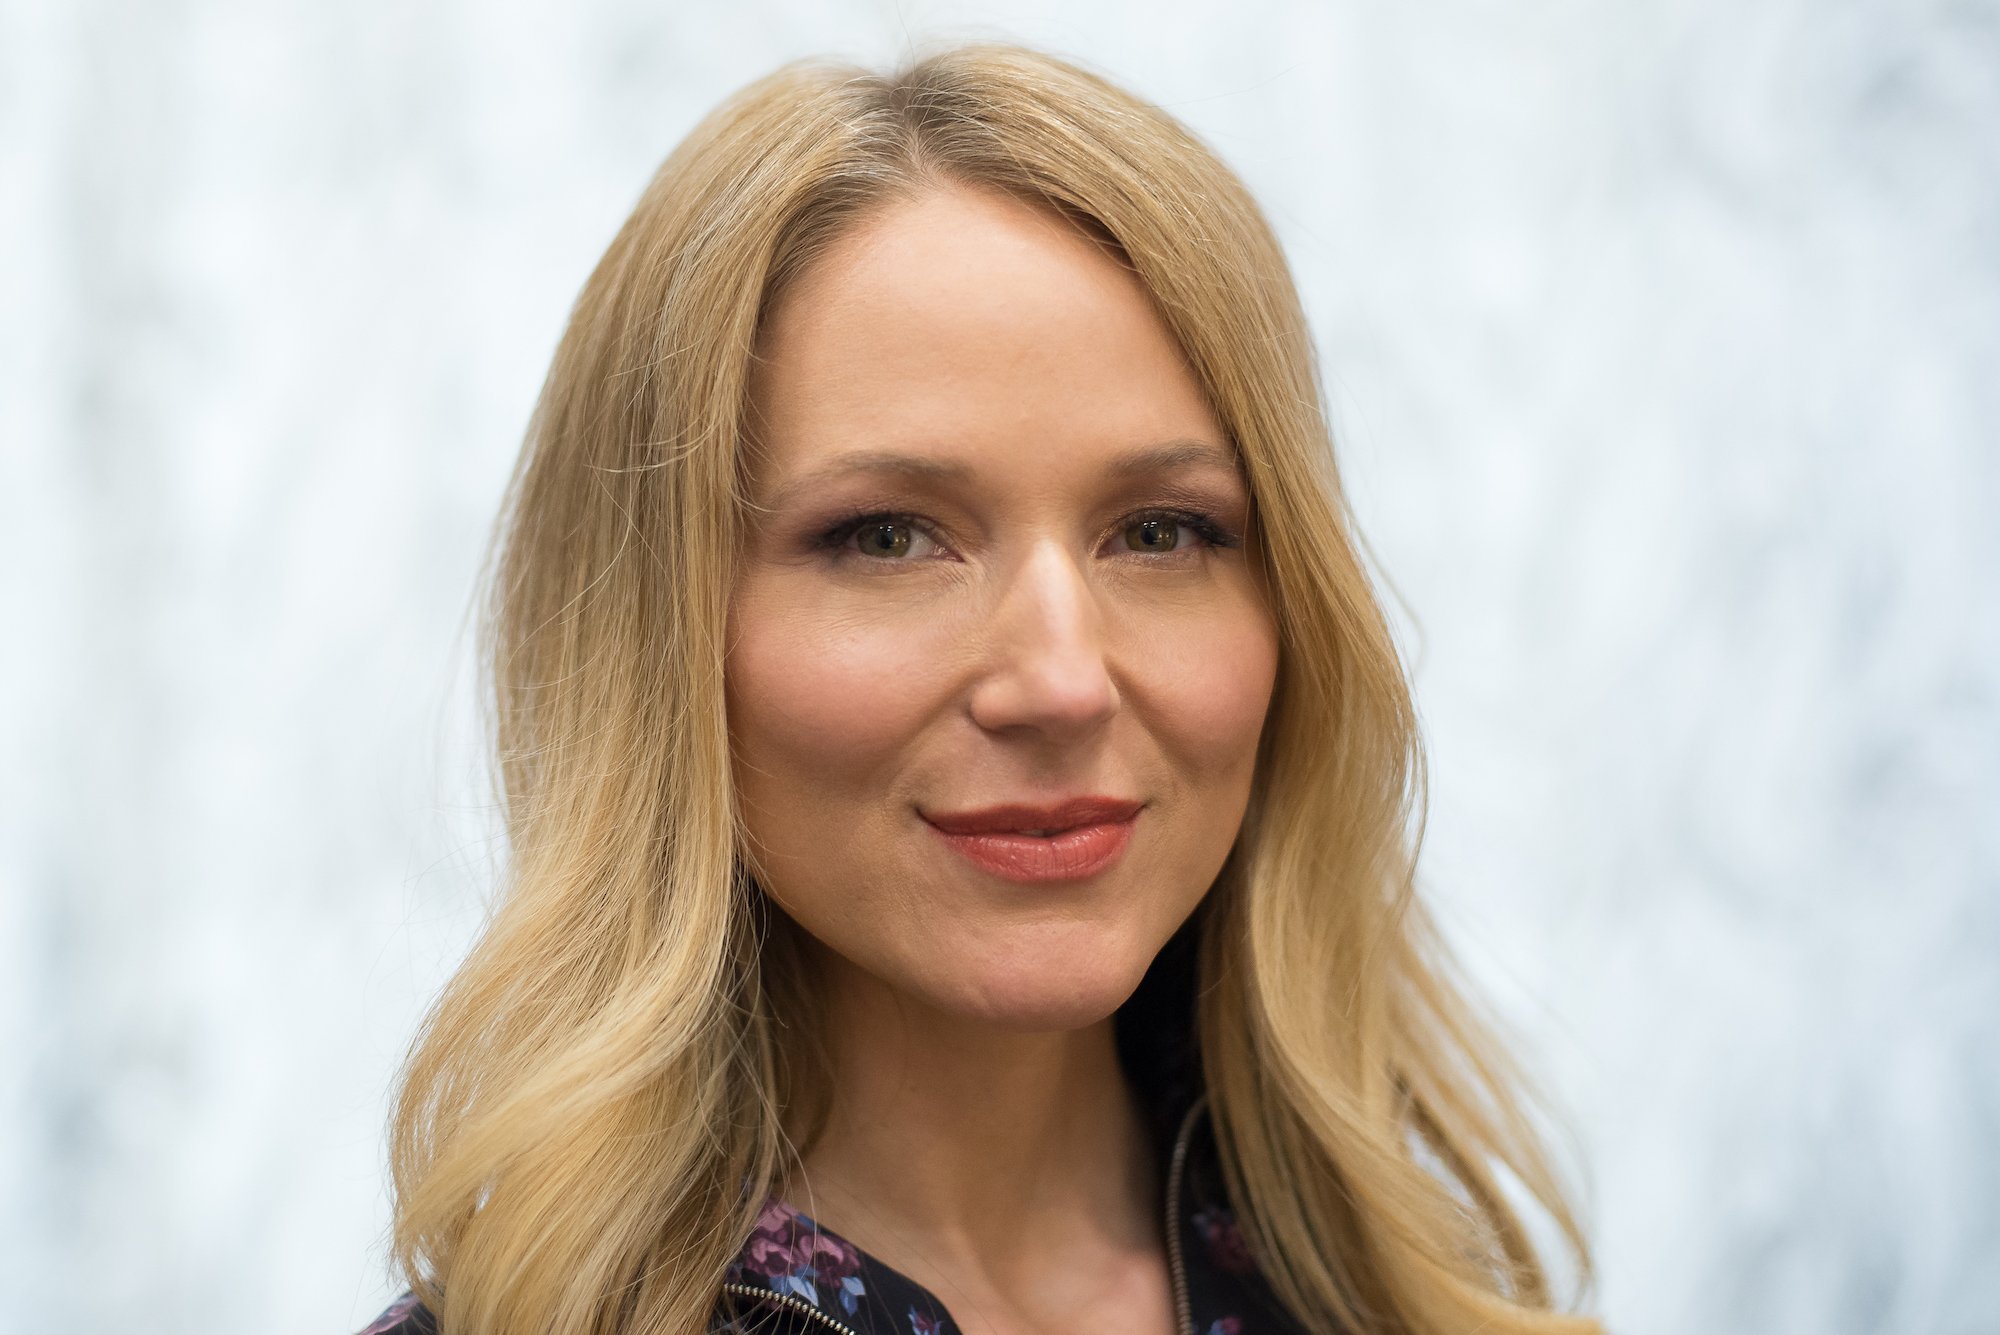 Jewel's Love Letter to Women Reminds Everyone To “Be Kind to